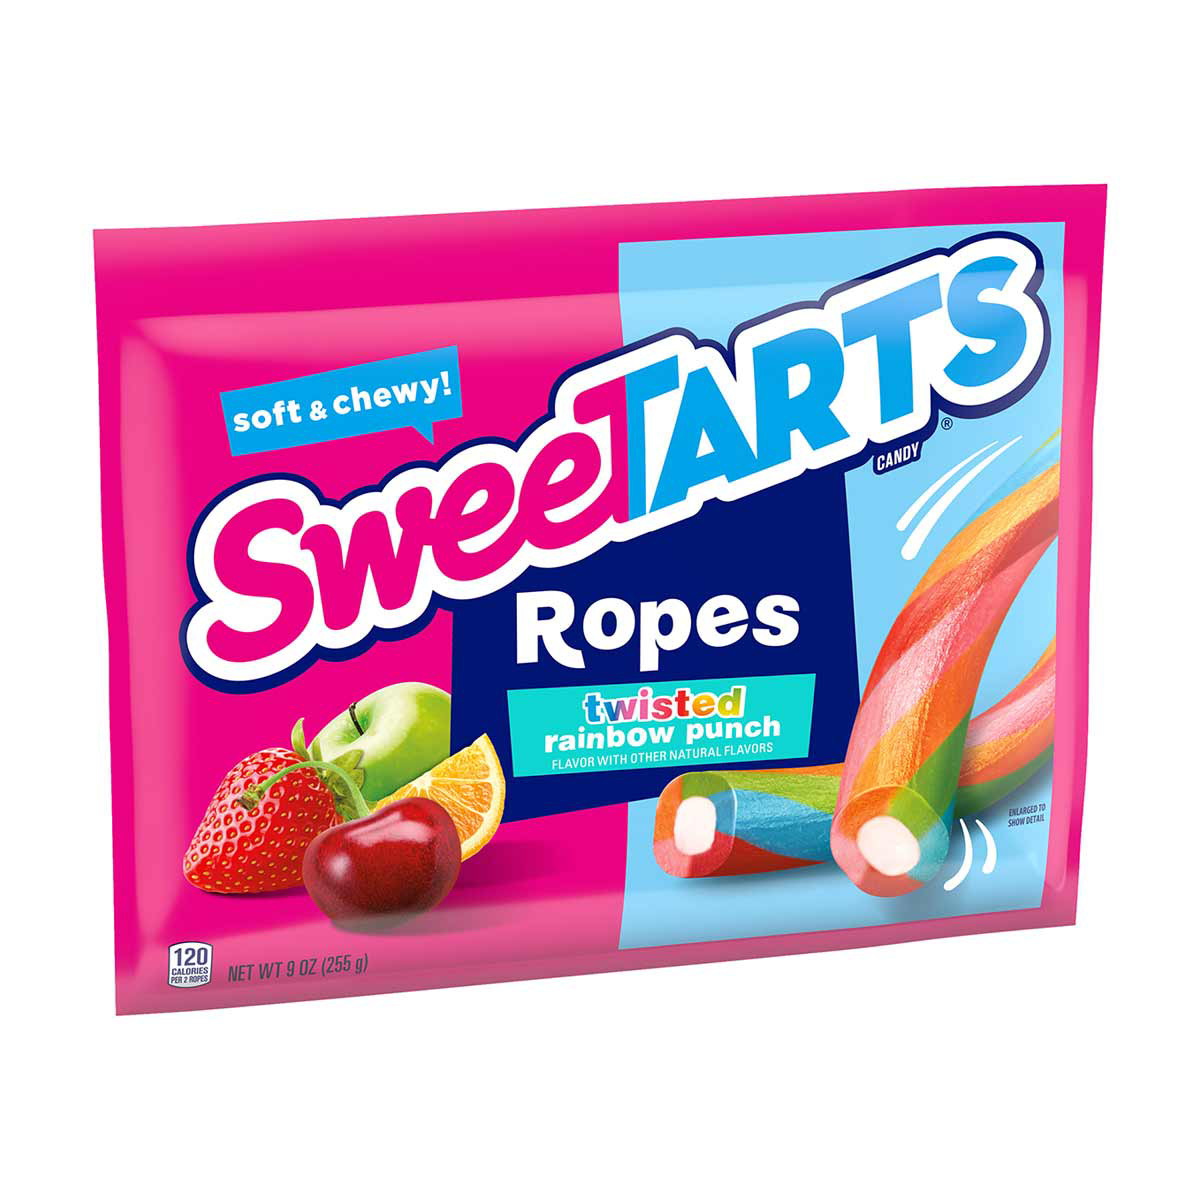 SweeTARTS Soft & Chewy Ropes Candy, Twisted Rainbow Punch, 9 oz